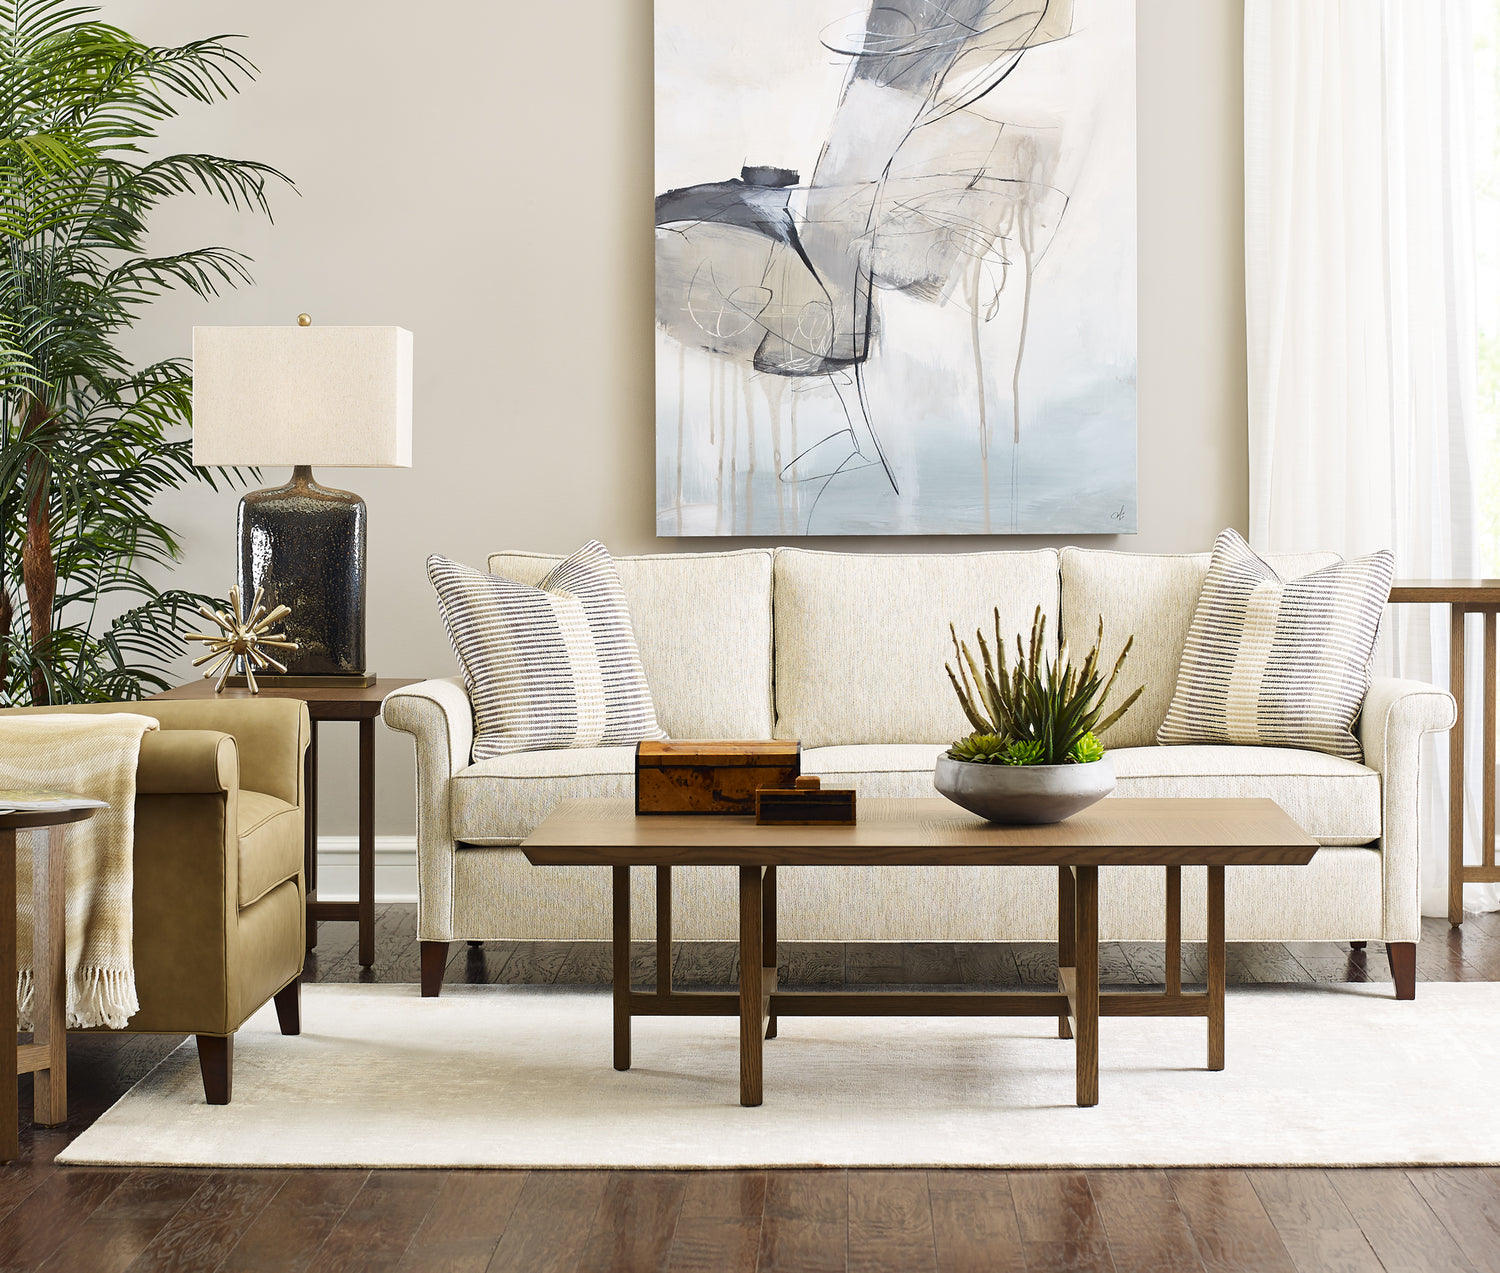 Origins by Stickley Belleville living room upholstery set up, showcasing a white fabric sofa and tan leather chair with a coffee table in front of them. There is a large white, gray, and blue painting behind the sofa and a green plant next to the sofa.